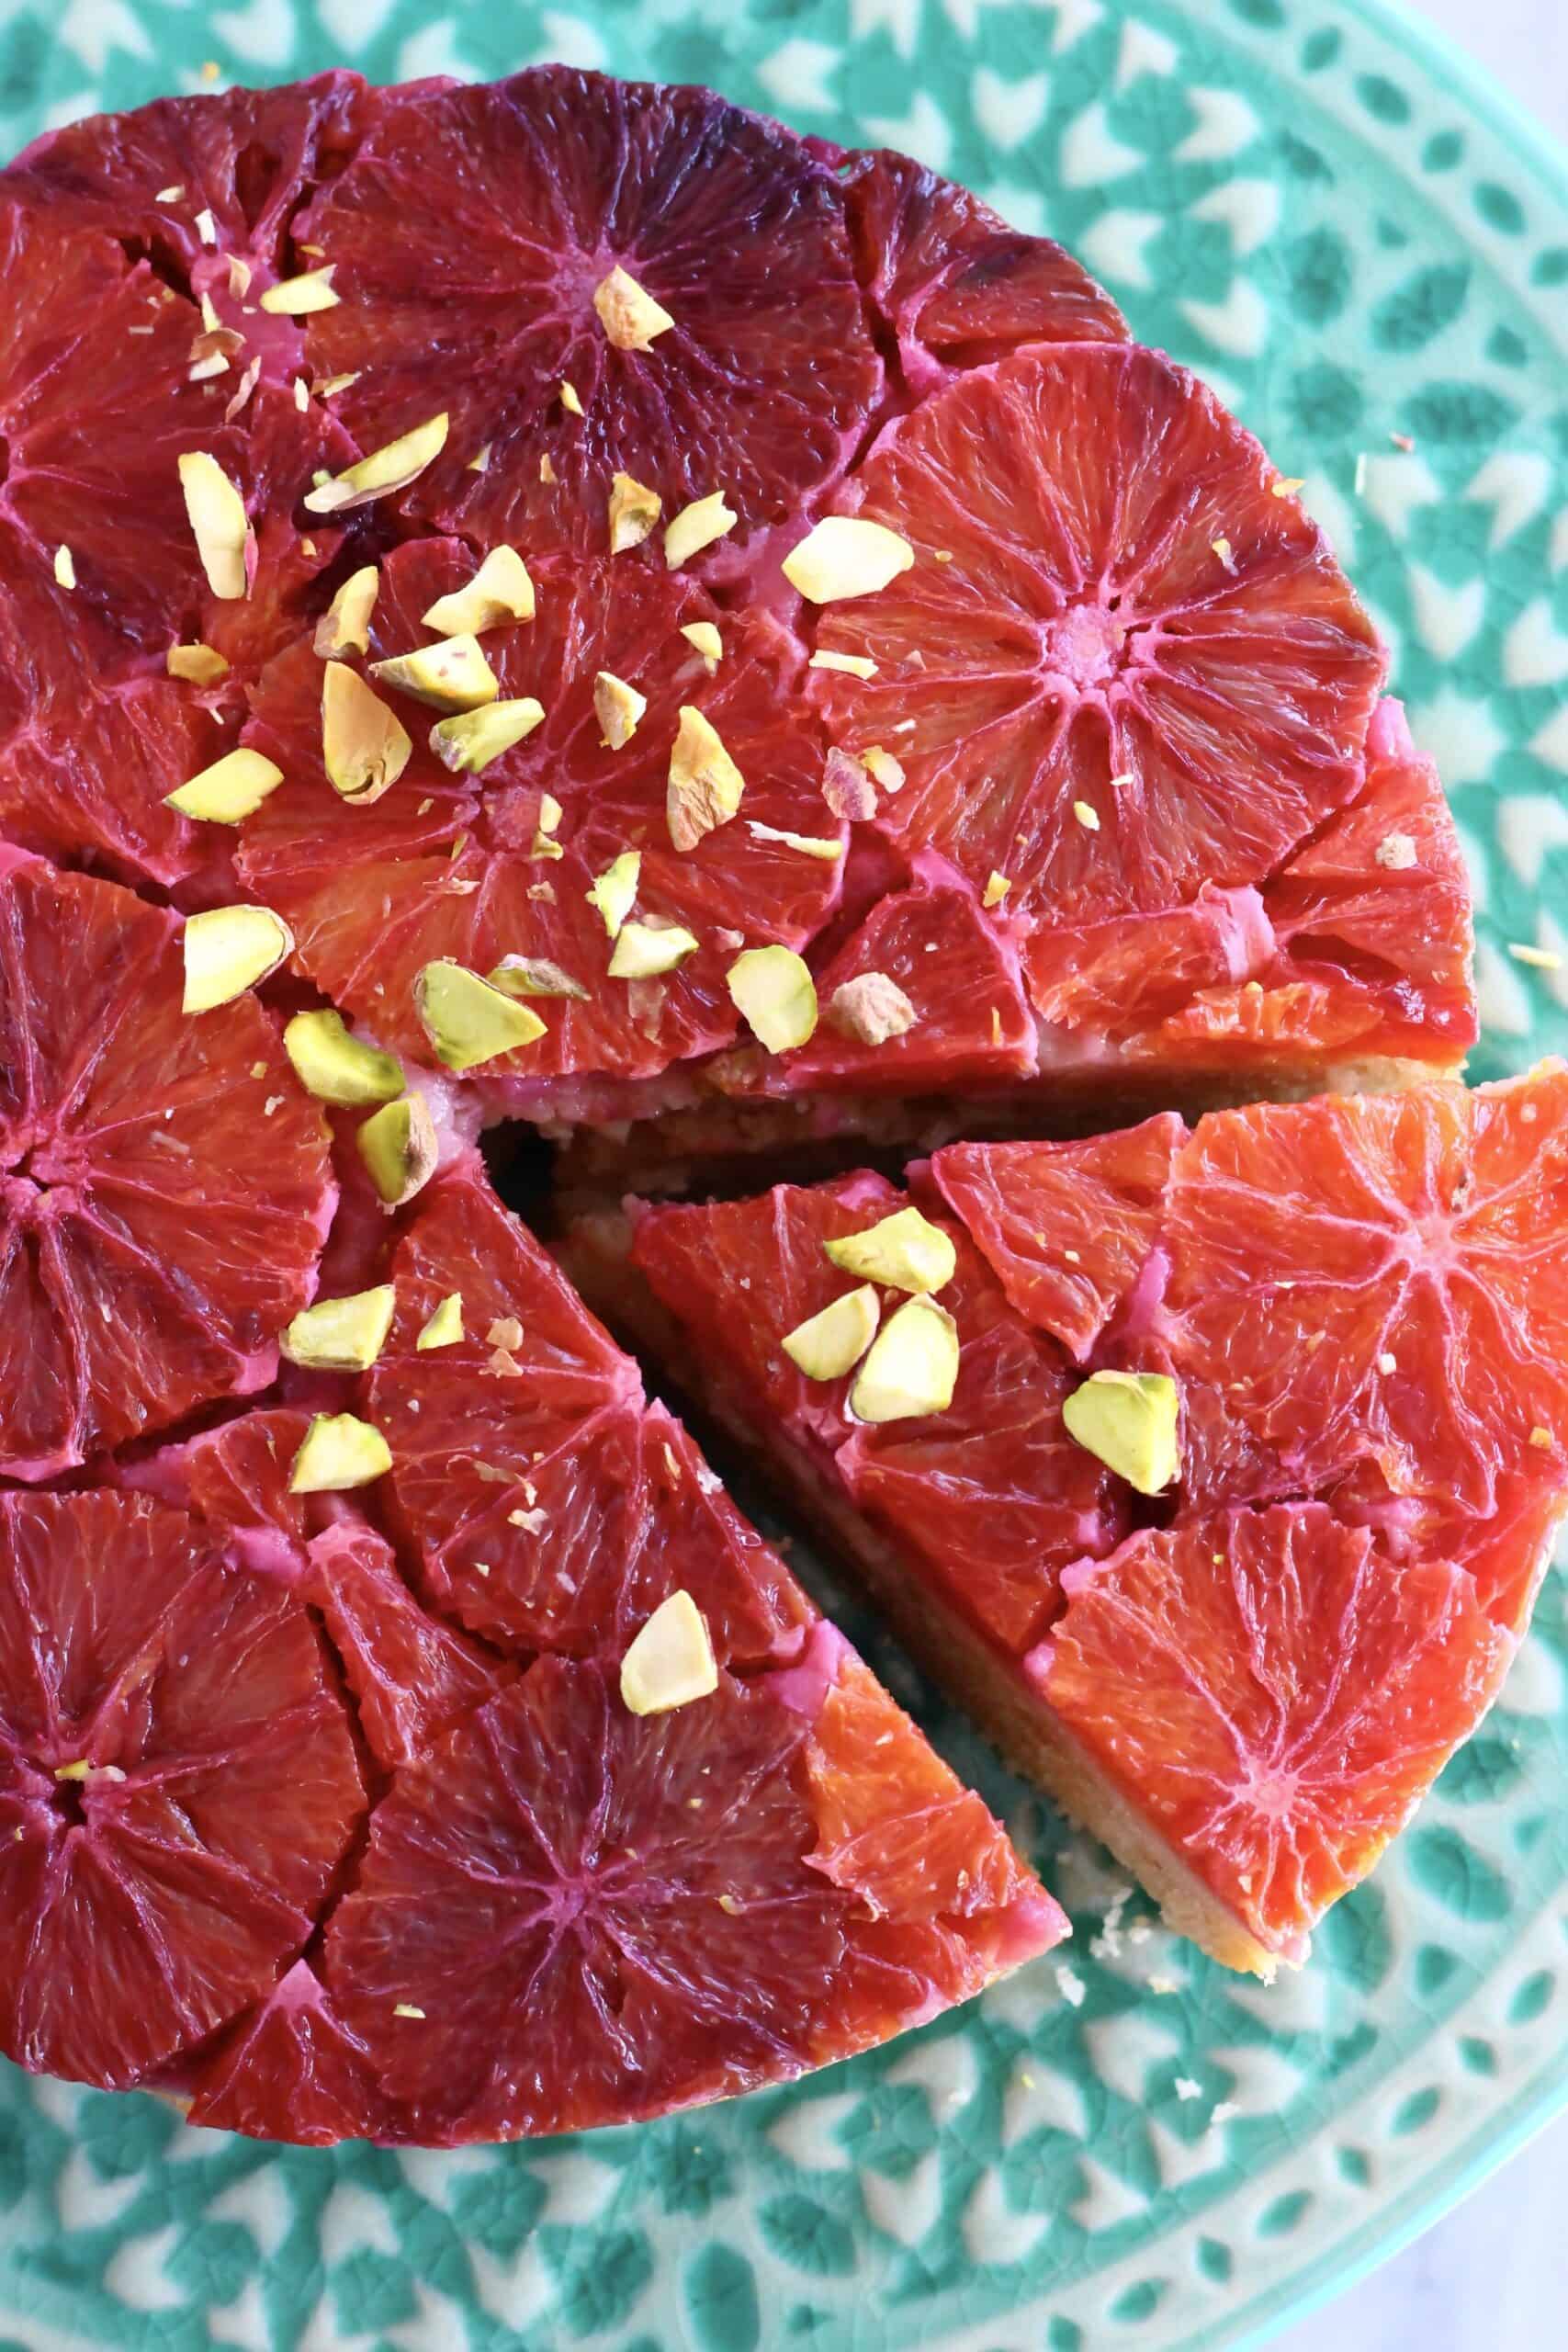 A gluten-free vegan blood orange cake on a cake stand with a slice taken out of it